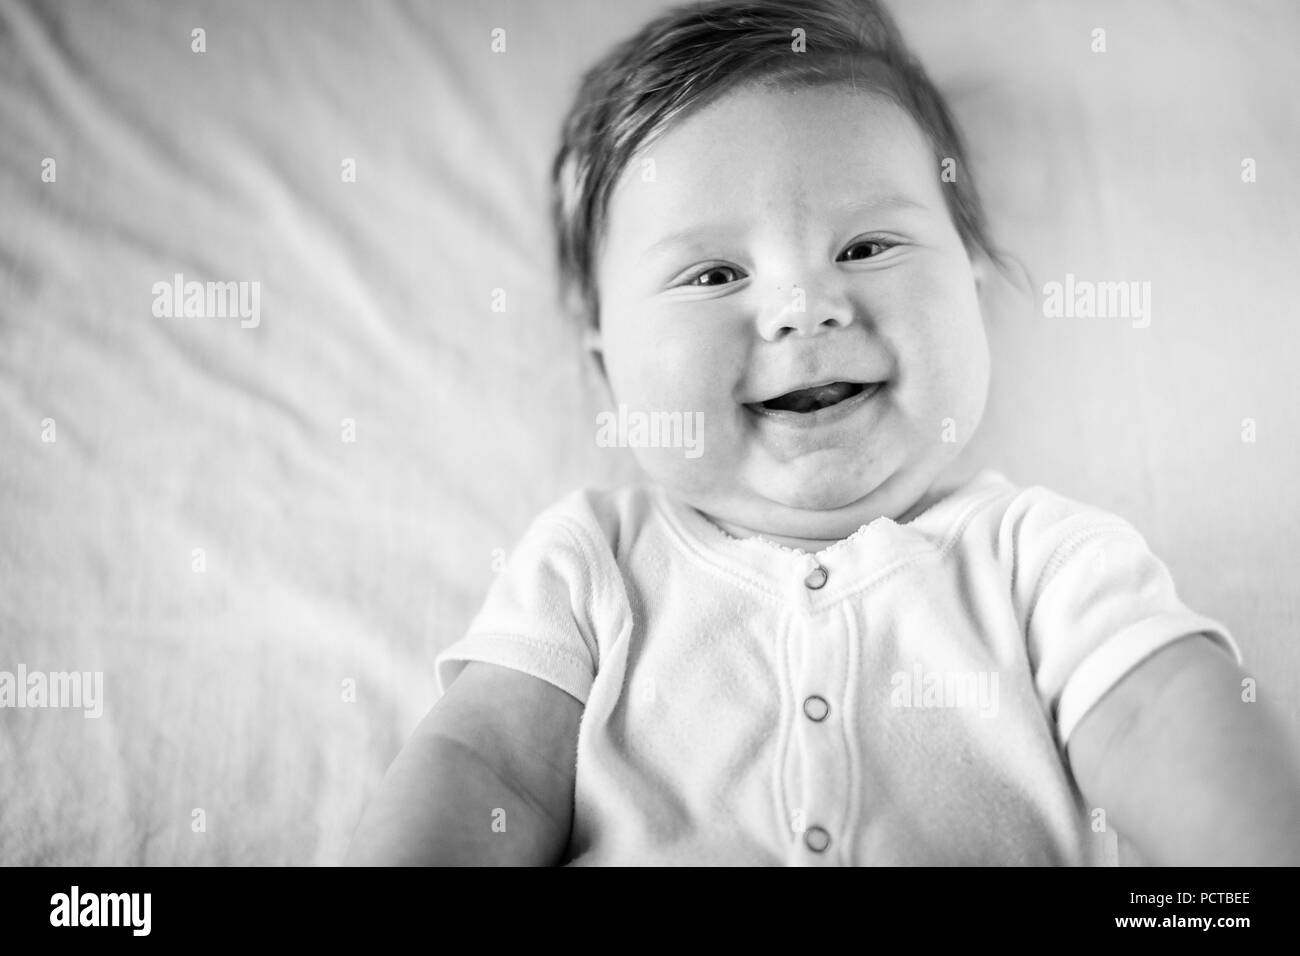 Baby, boy, laughing at the camera, black and white shot Stock Photo